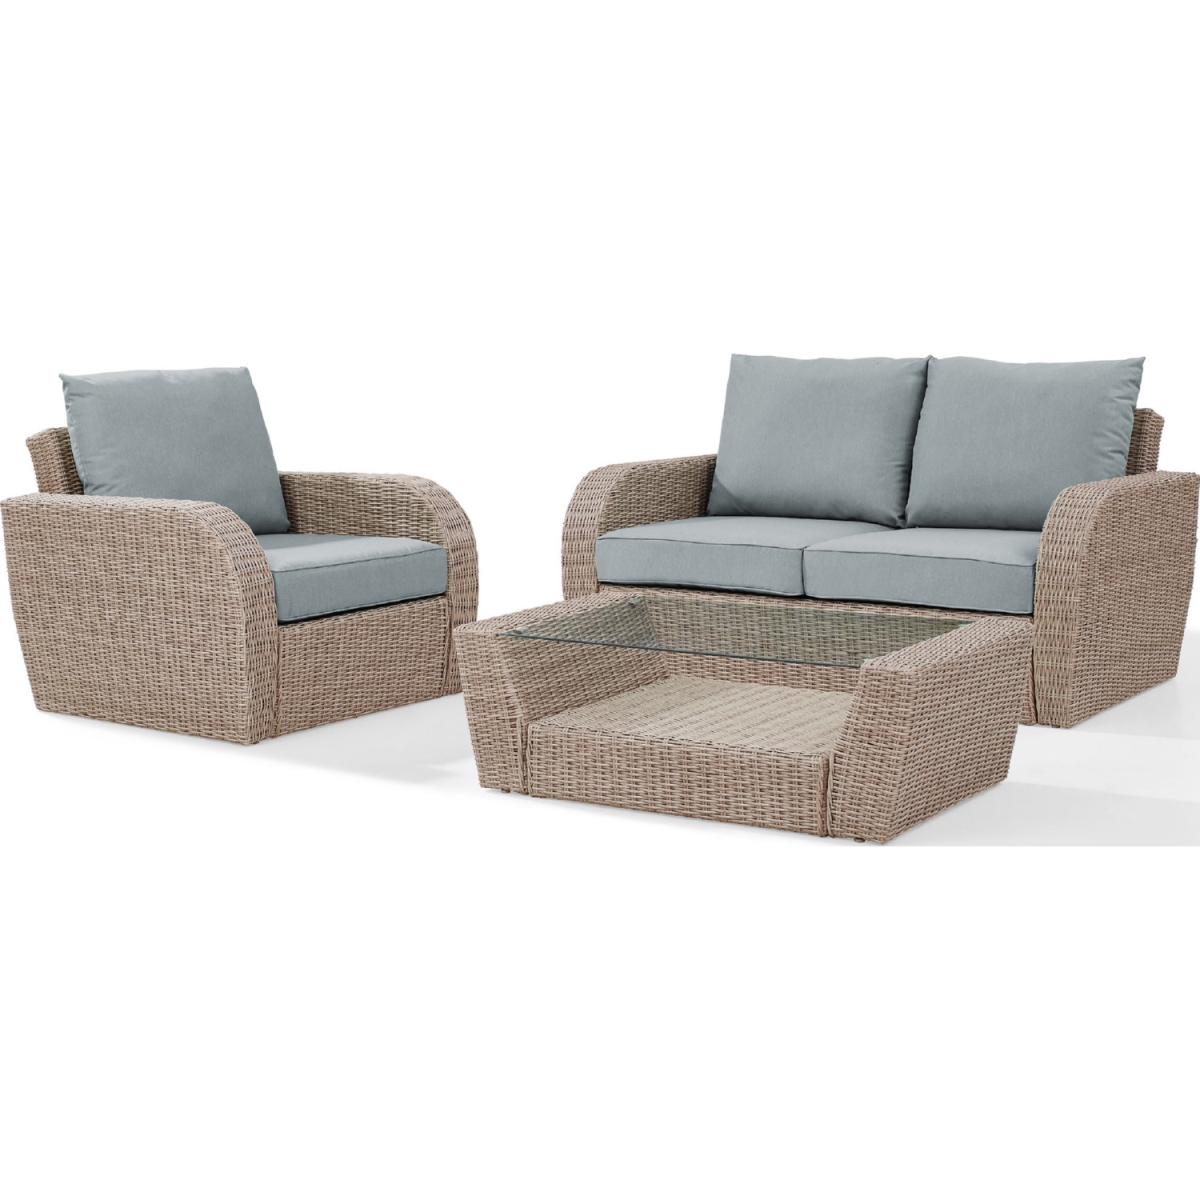 Ko70137wh-mi 3 Piece St. Augustine Outdoor Wicker Seating Set With Mist Cushion - Loveseat, Arm Chair, Coffee Table